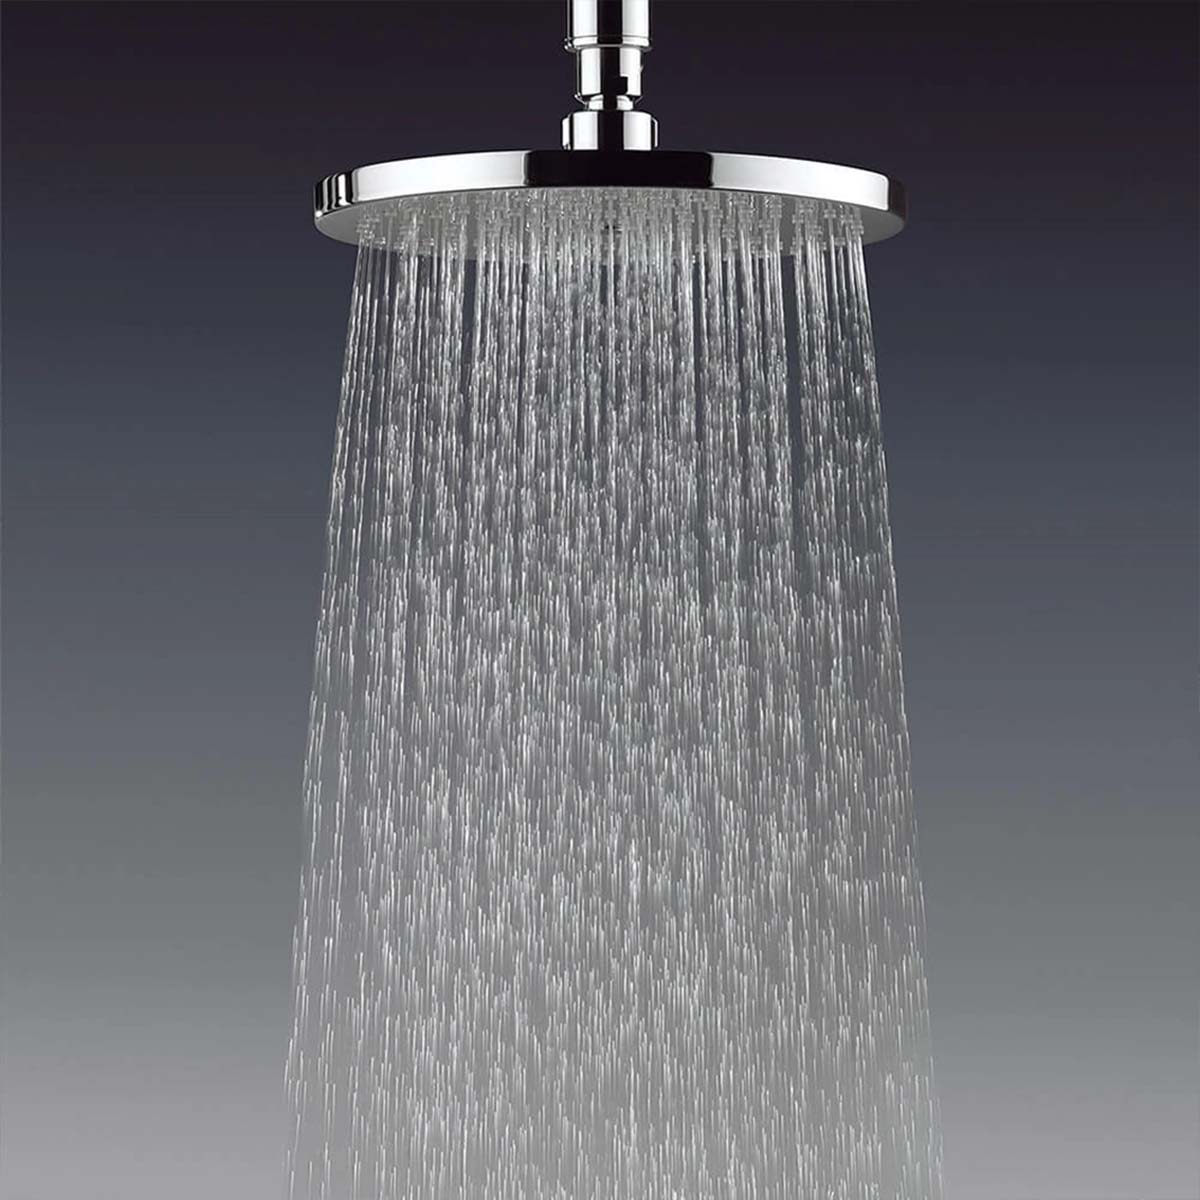 Crosswater Kai 2 Outlet Thermostatic Shower Valve with Pencil Handset and Fixed Overhead Spray Pattern